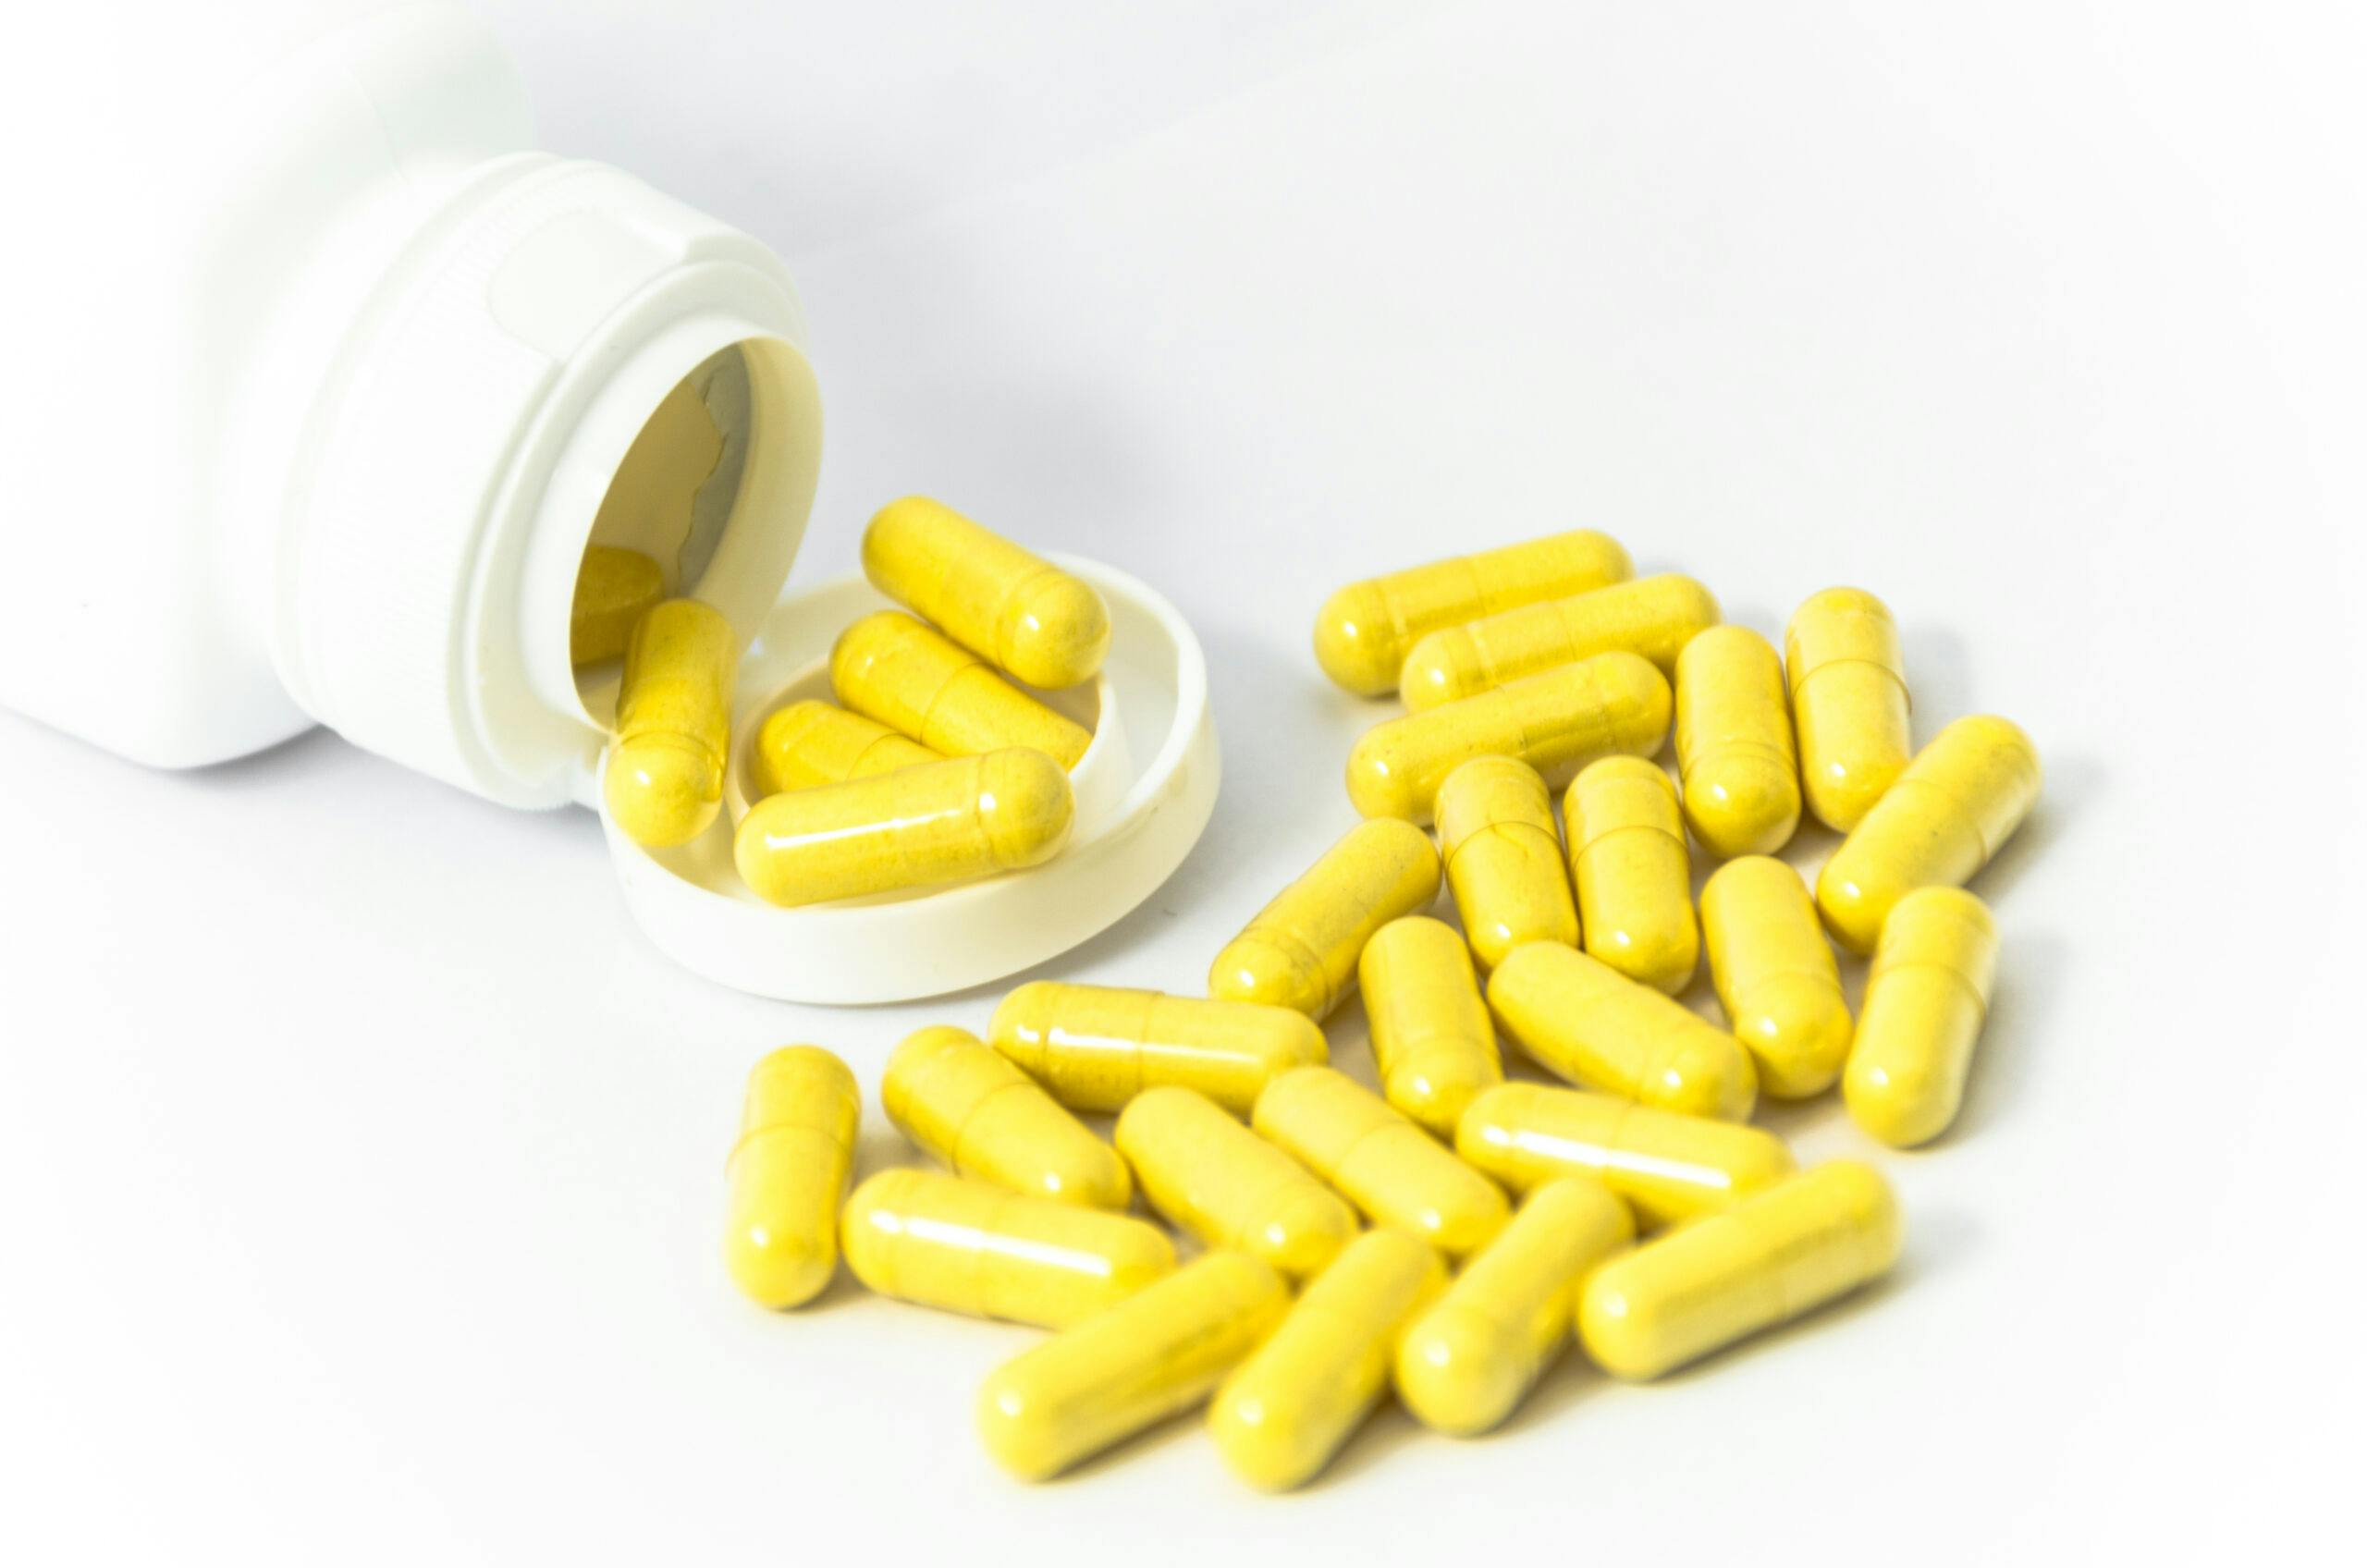 yellow capsule pills and bottle